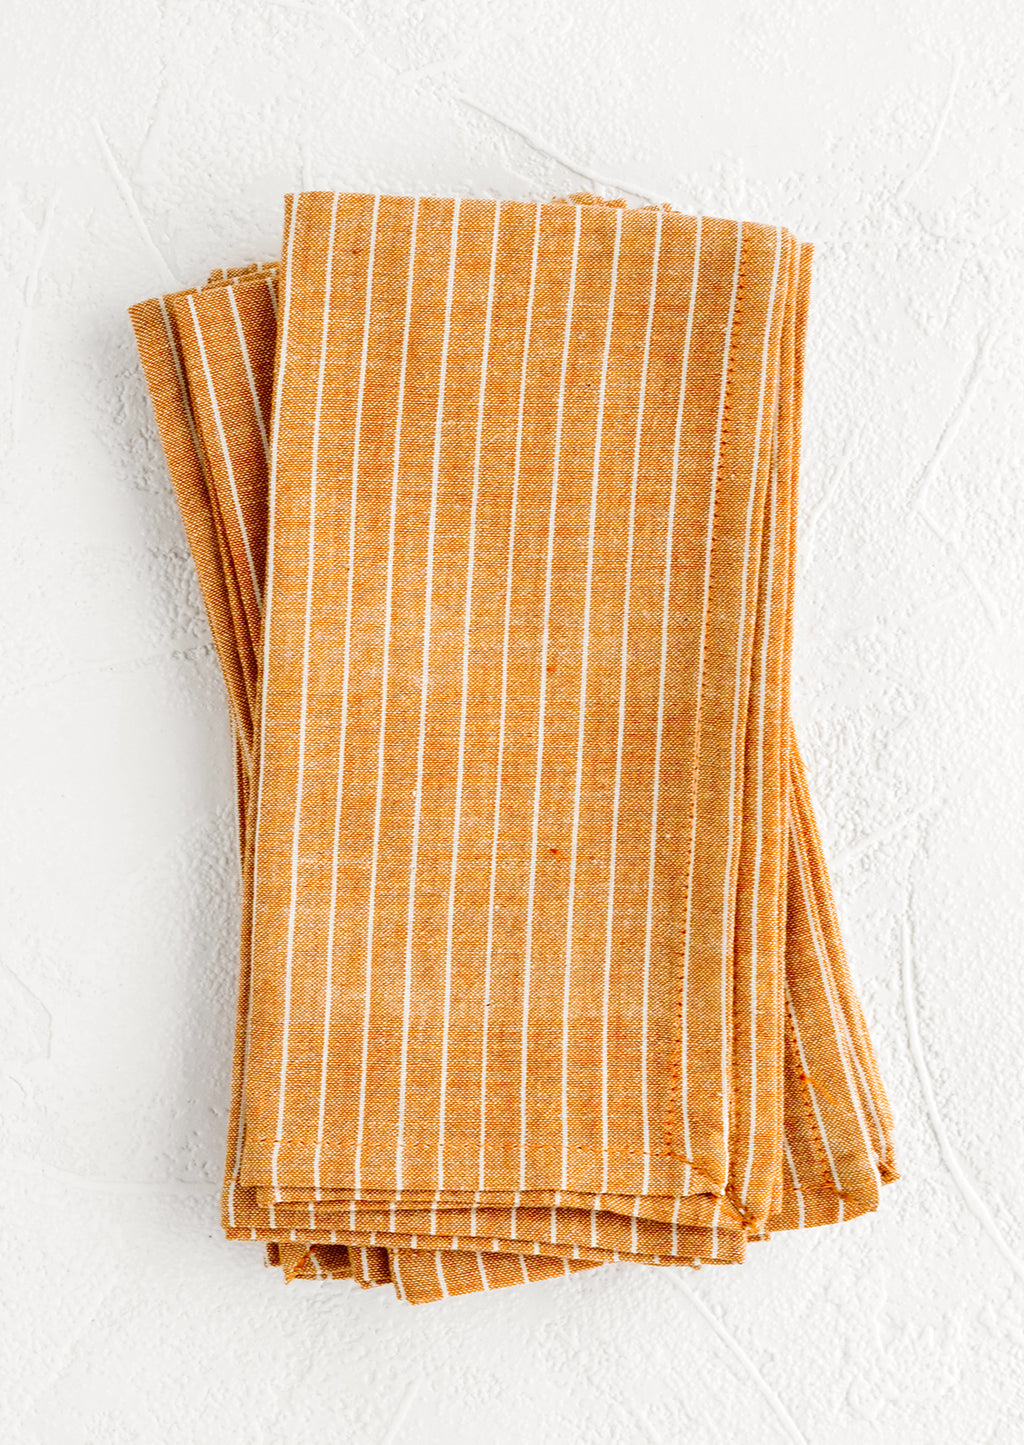 2: Folded fabric napkins in a pile featuring orange and white pinstripe pattern.